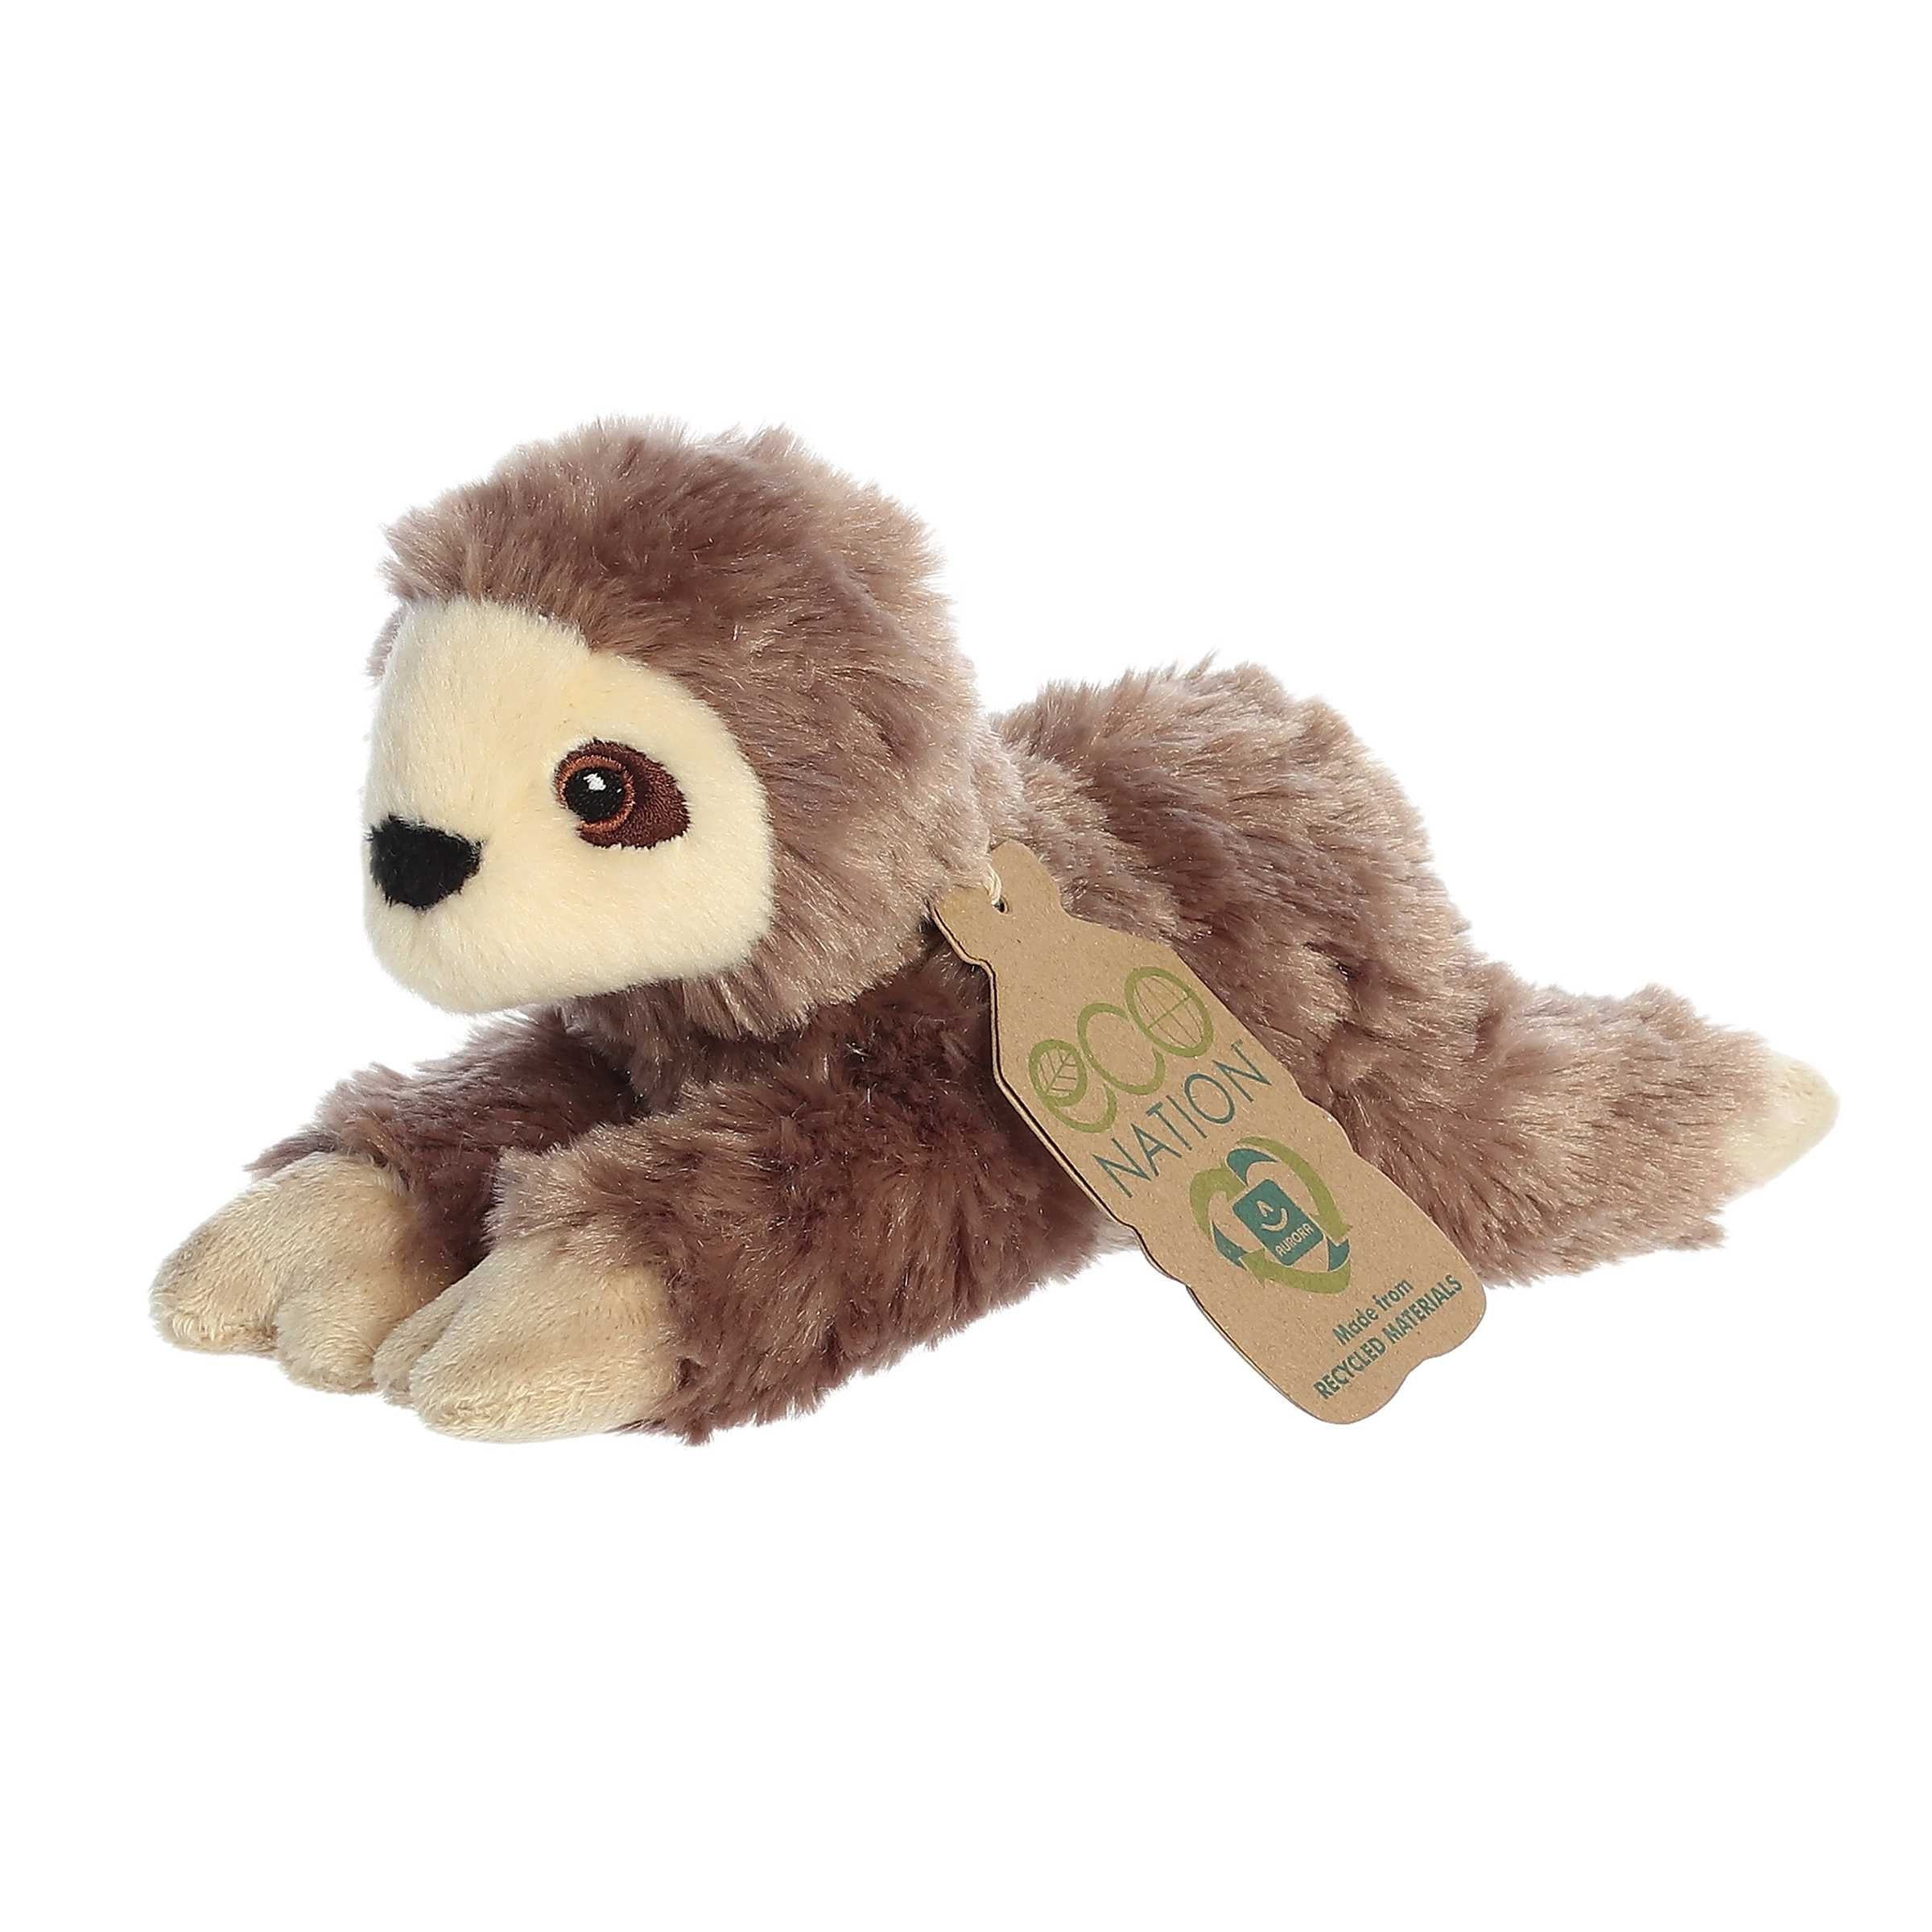 Eco Softie Sloth Plush, with a lovable expression and a fluffy brown coat, bearing the 'Eco Nation' tag for eco-awareness.